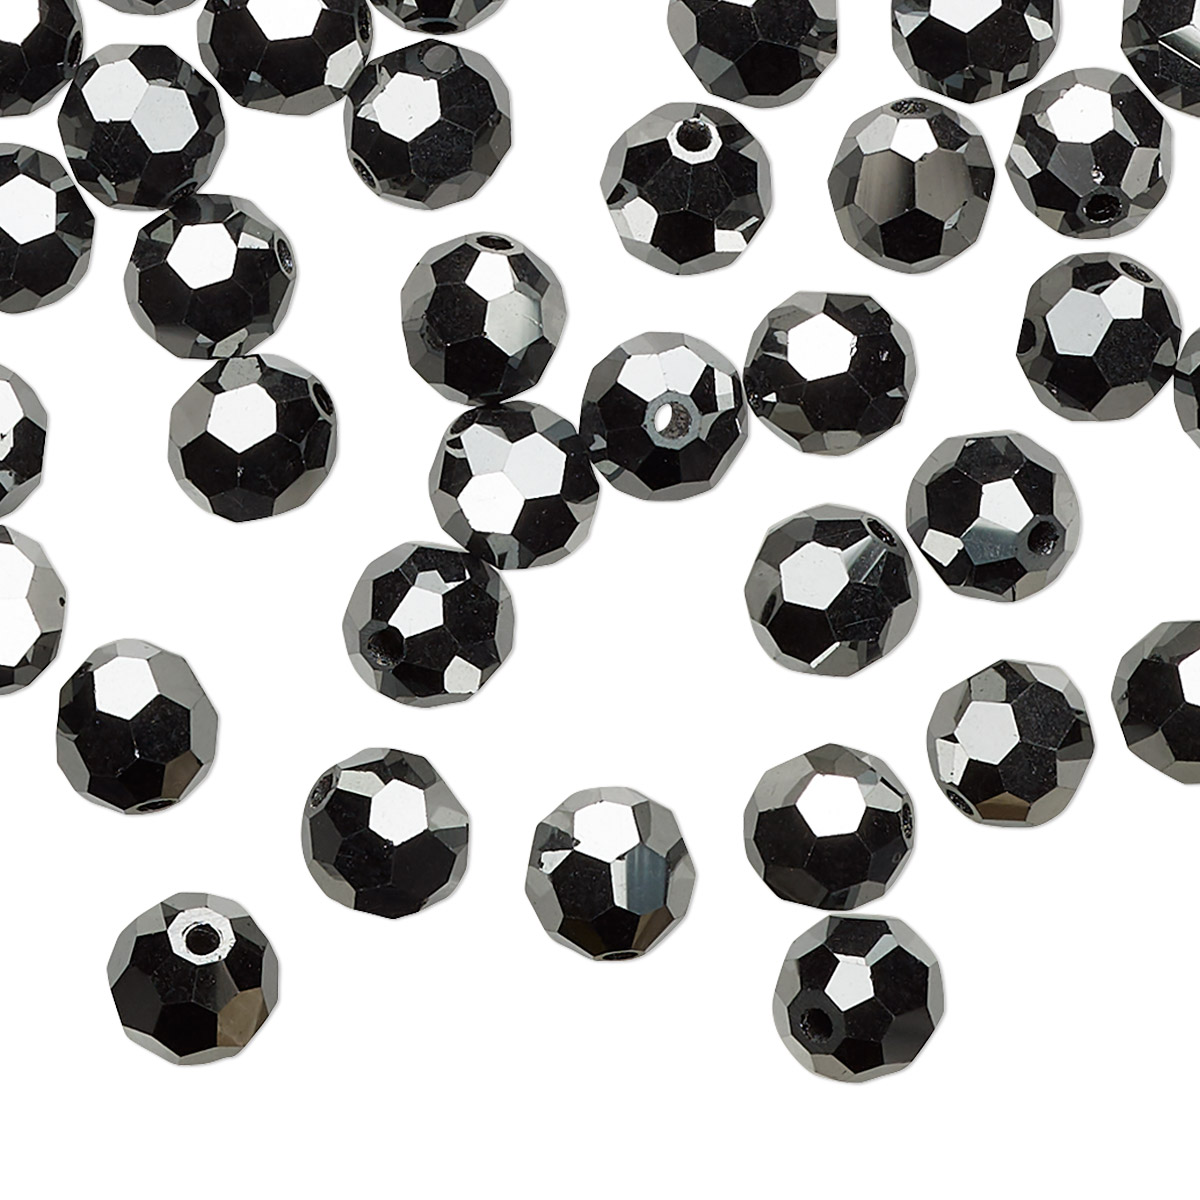 Bead, Preciosa Czech crystal, jet hematite 2X, 6mm faceted round. Sold ...